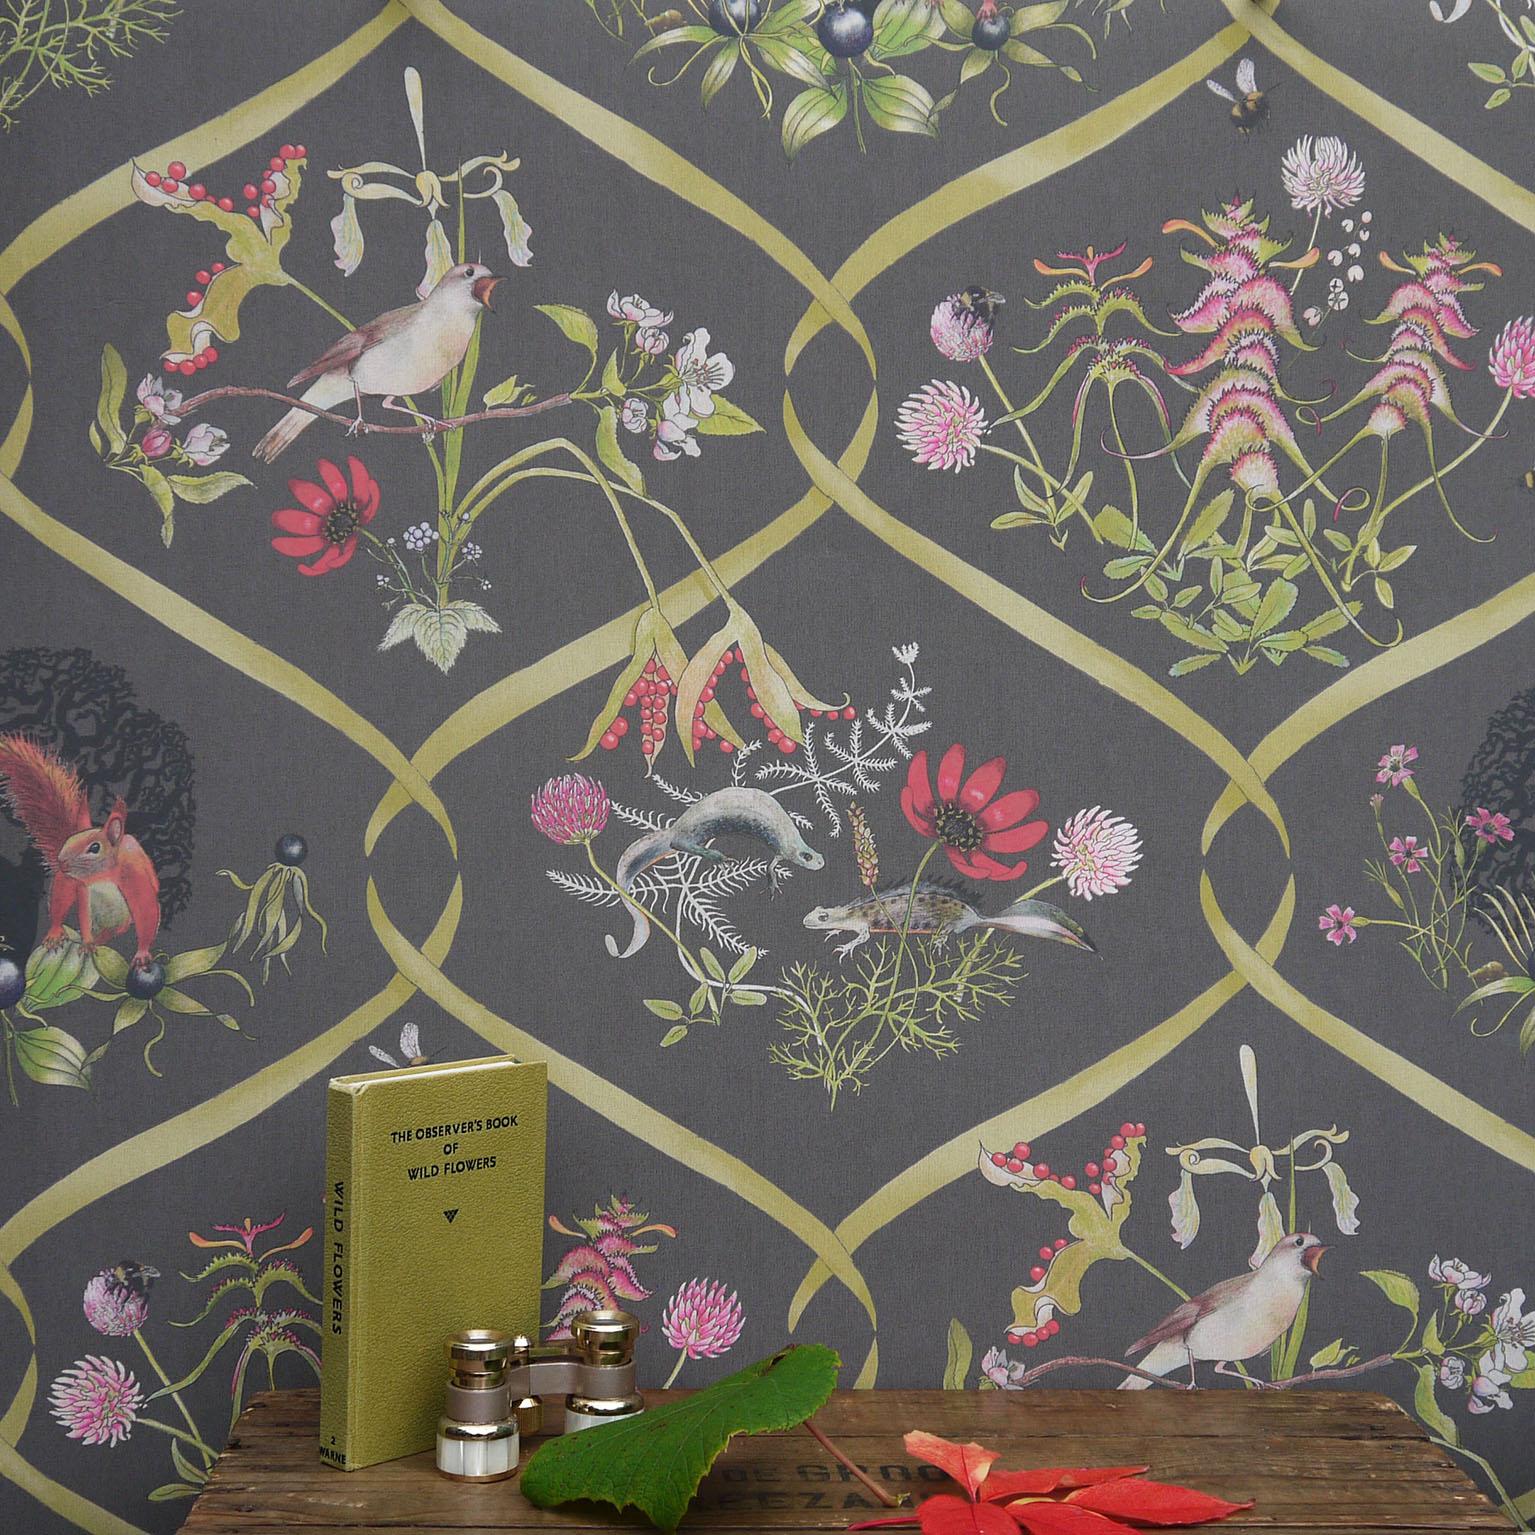 Collection: English Mercia: Mercia Ribbons
Product Code: 29
Color: Cream/Duck Egg
Roll dimensions: 70cm x 10m (27.6in x 10.9yards)
Area: 7sq.m (8.4 sq.yards)
Pattern repeat: Straight
Wallpaper: Non-woven 147gsm Uncoated

Fire rating: Fire certified